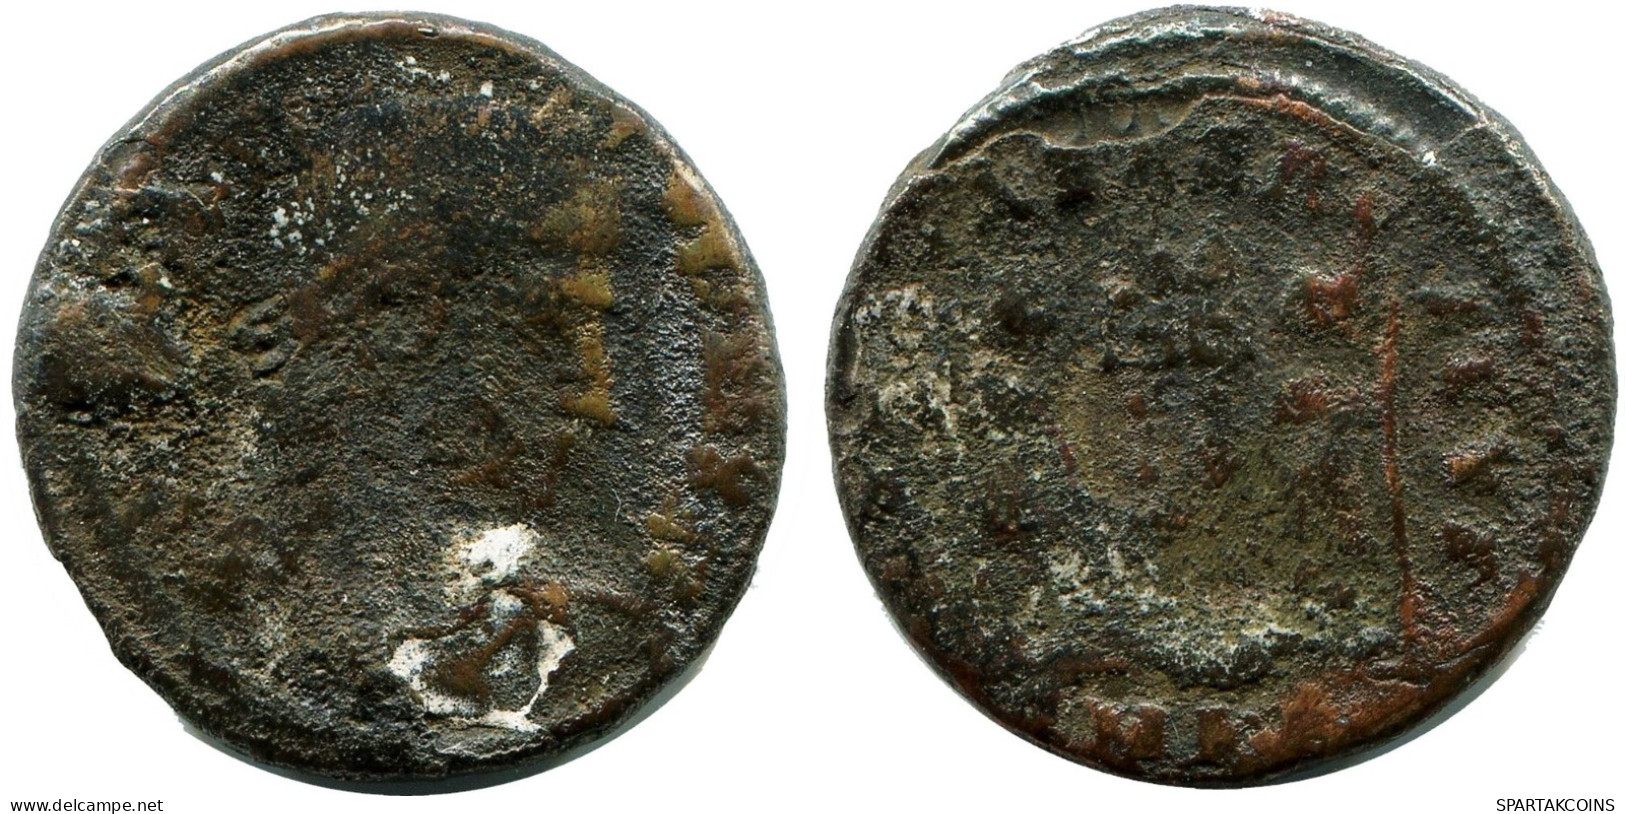 CONSTANTINE I MINTED IN CYZICUS FOUND IN IHNASYAH HOARD EGYPT #ANC10981.14.U.A - El Impero Christiano (307 / 363)